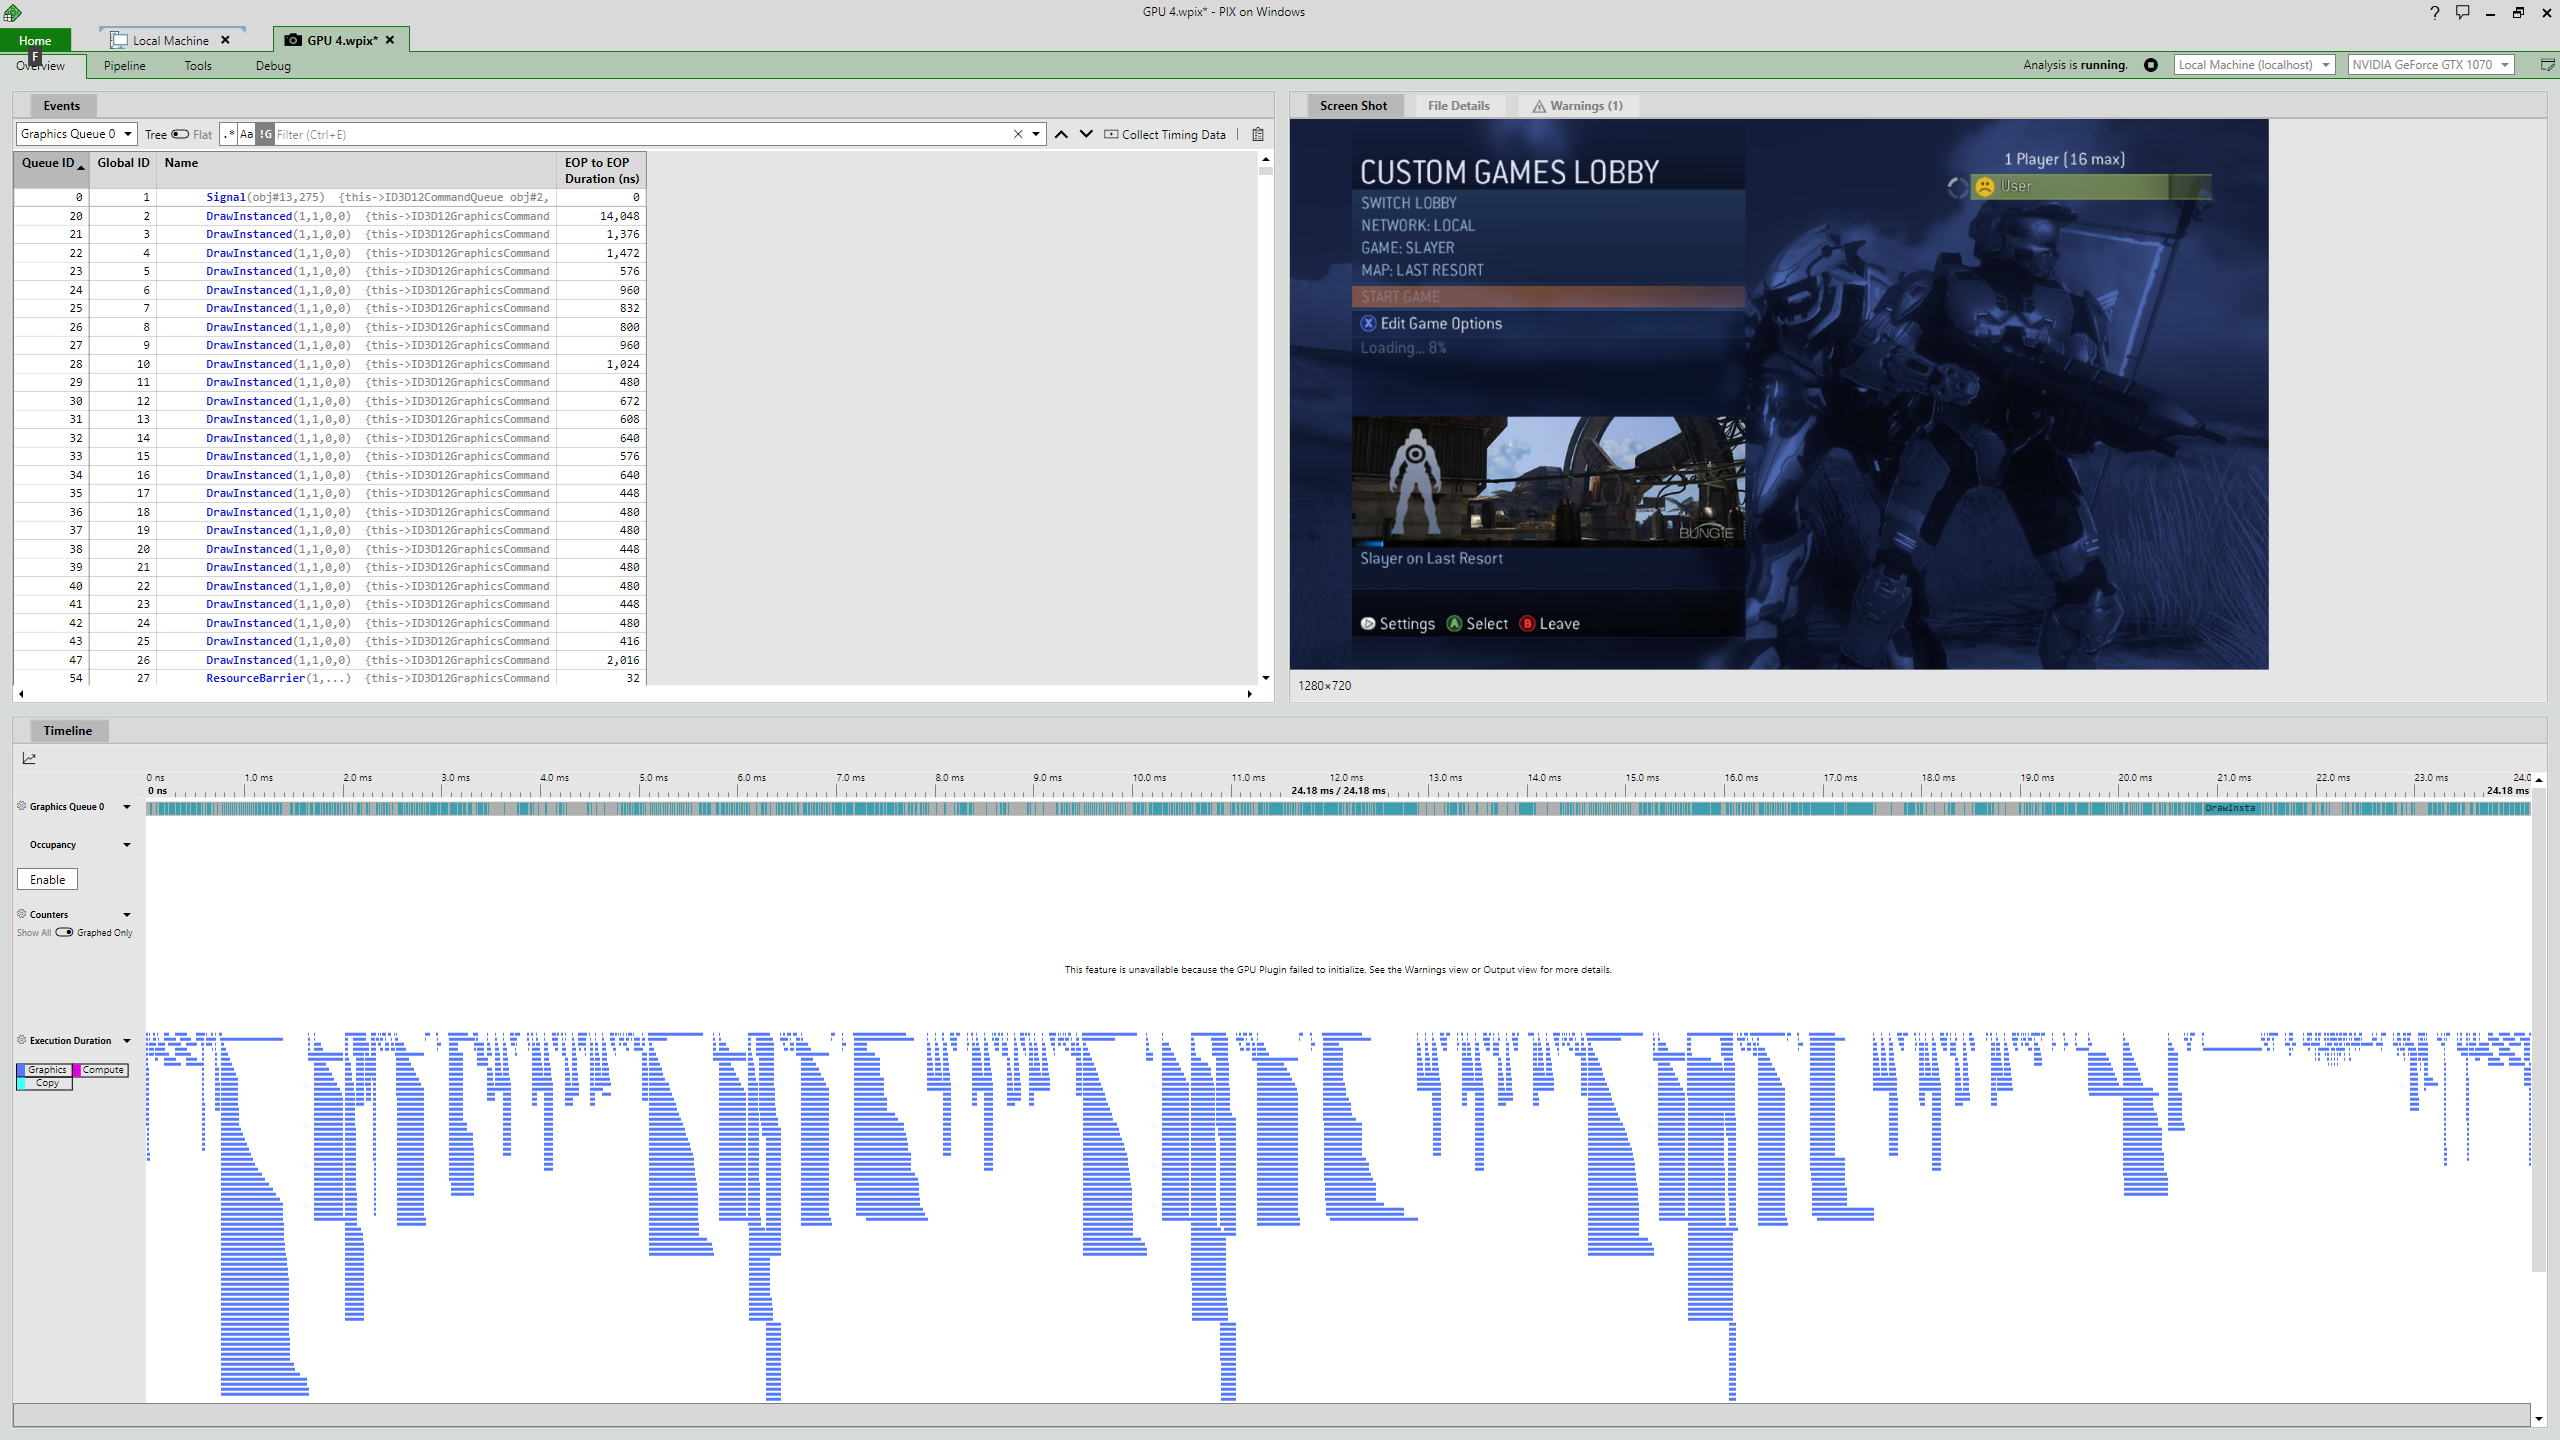 24 milliseconds taken to render a Halo 3 menu frame on the new render target implementation, with much better parallelism on the GPU